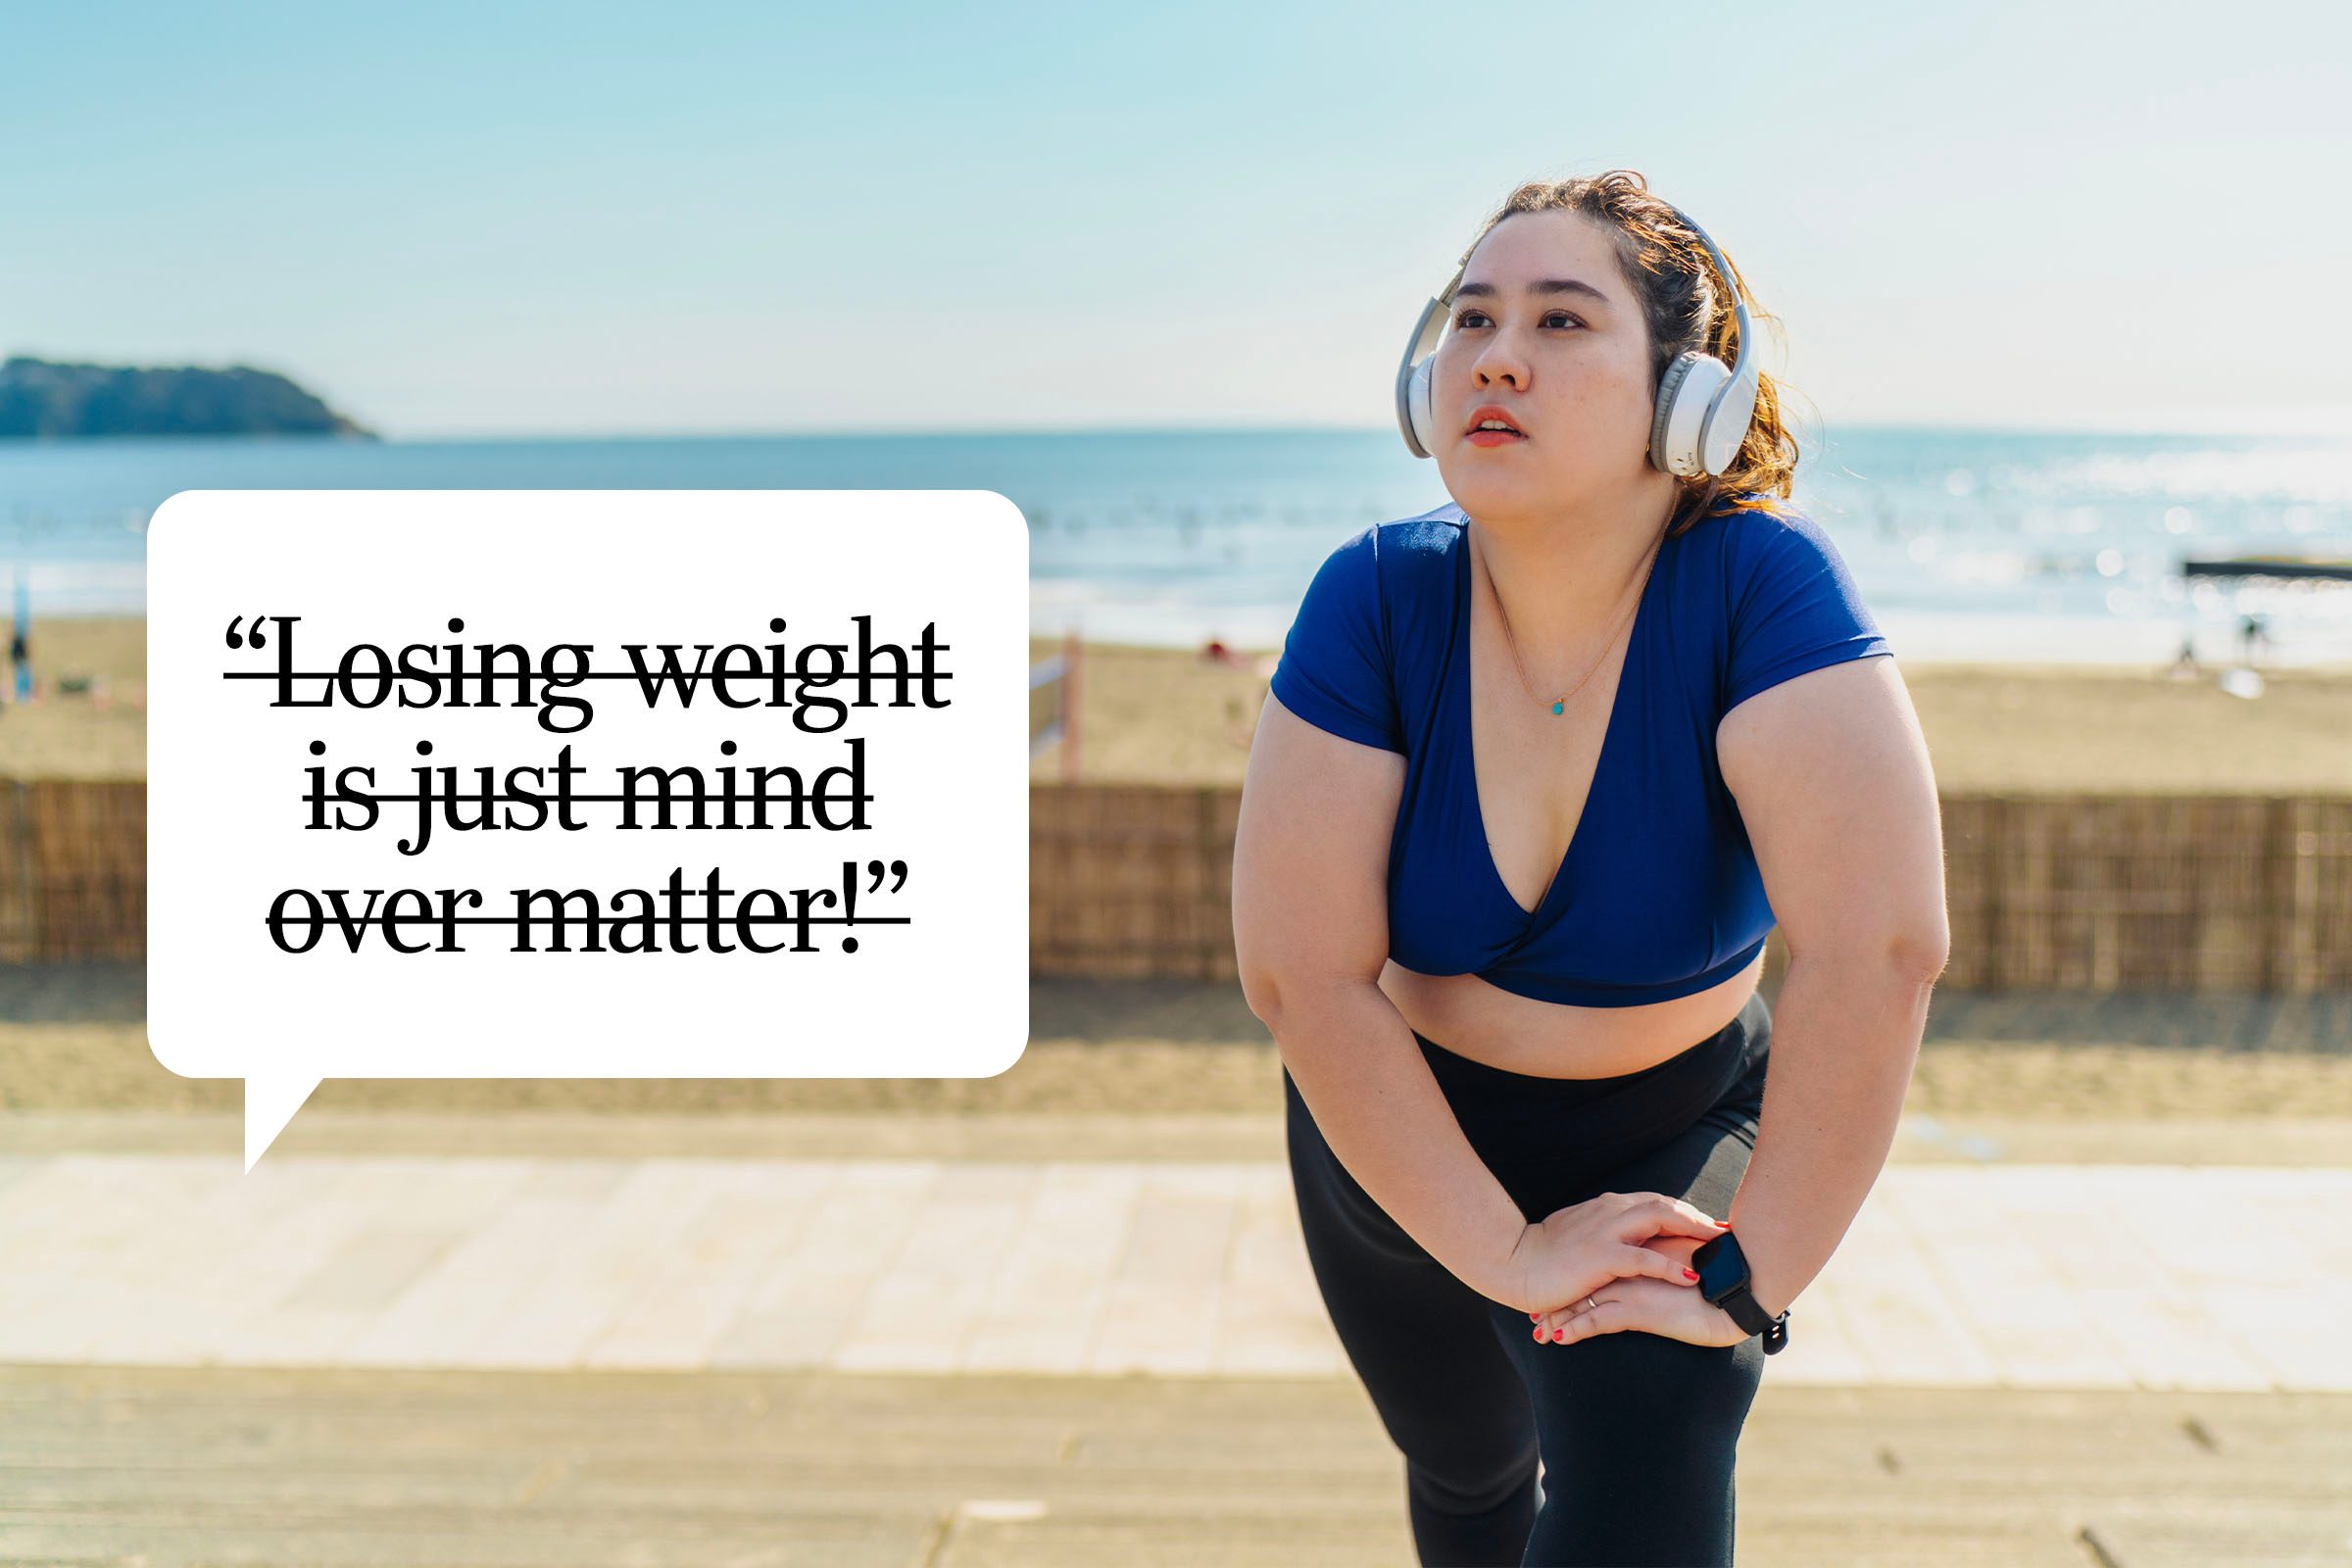 14 Common Etiquette Mistakes People Make When Talking About Weight